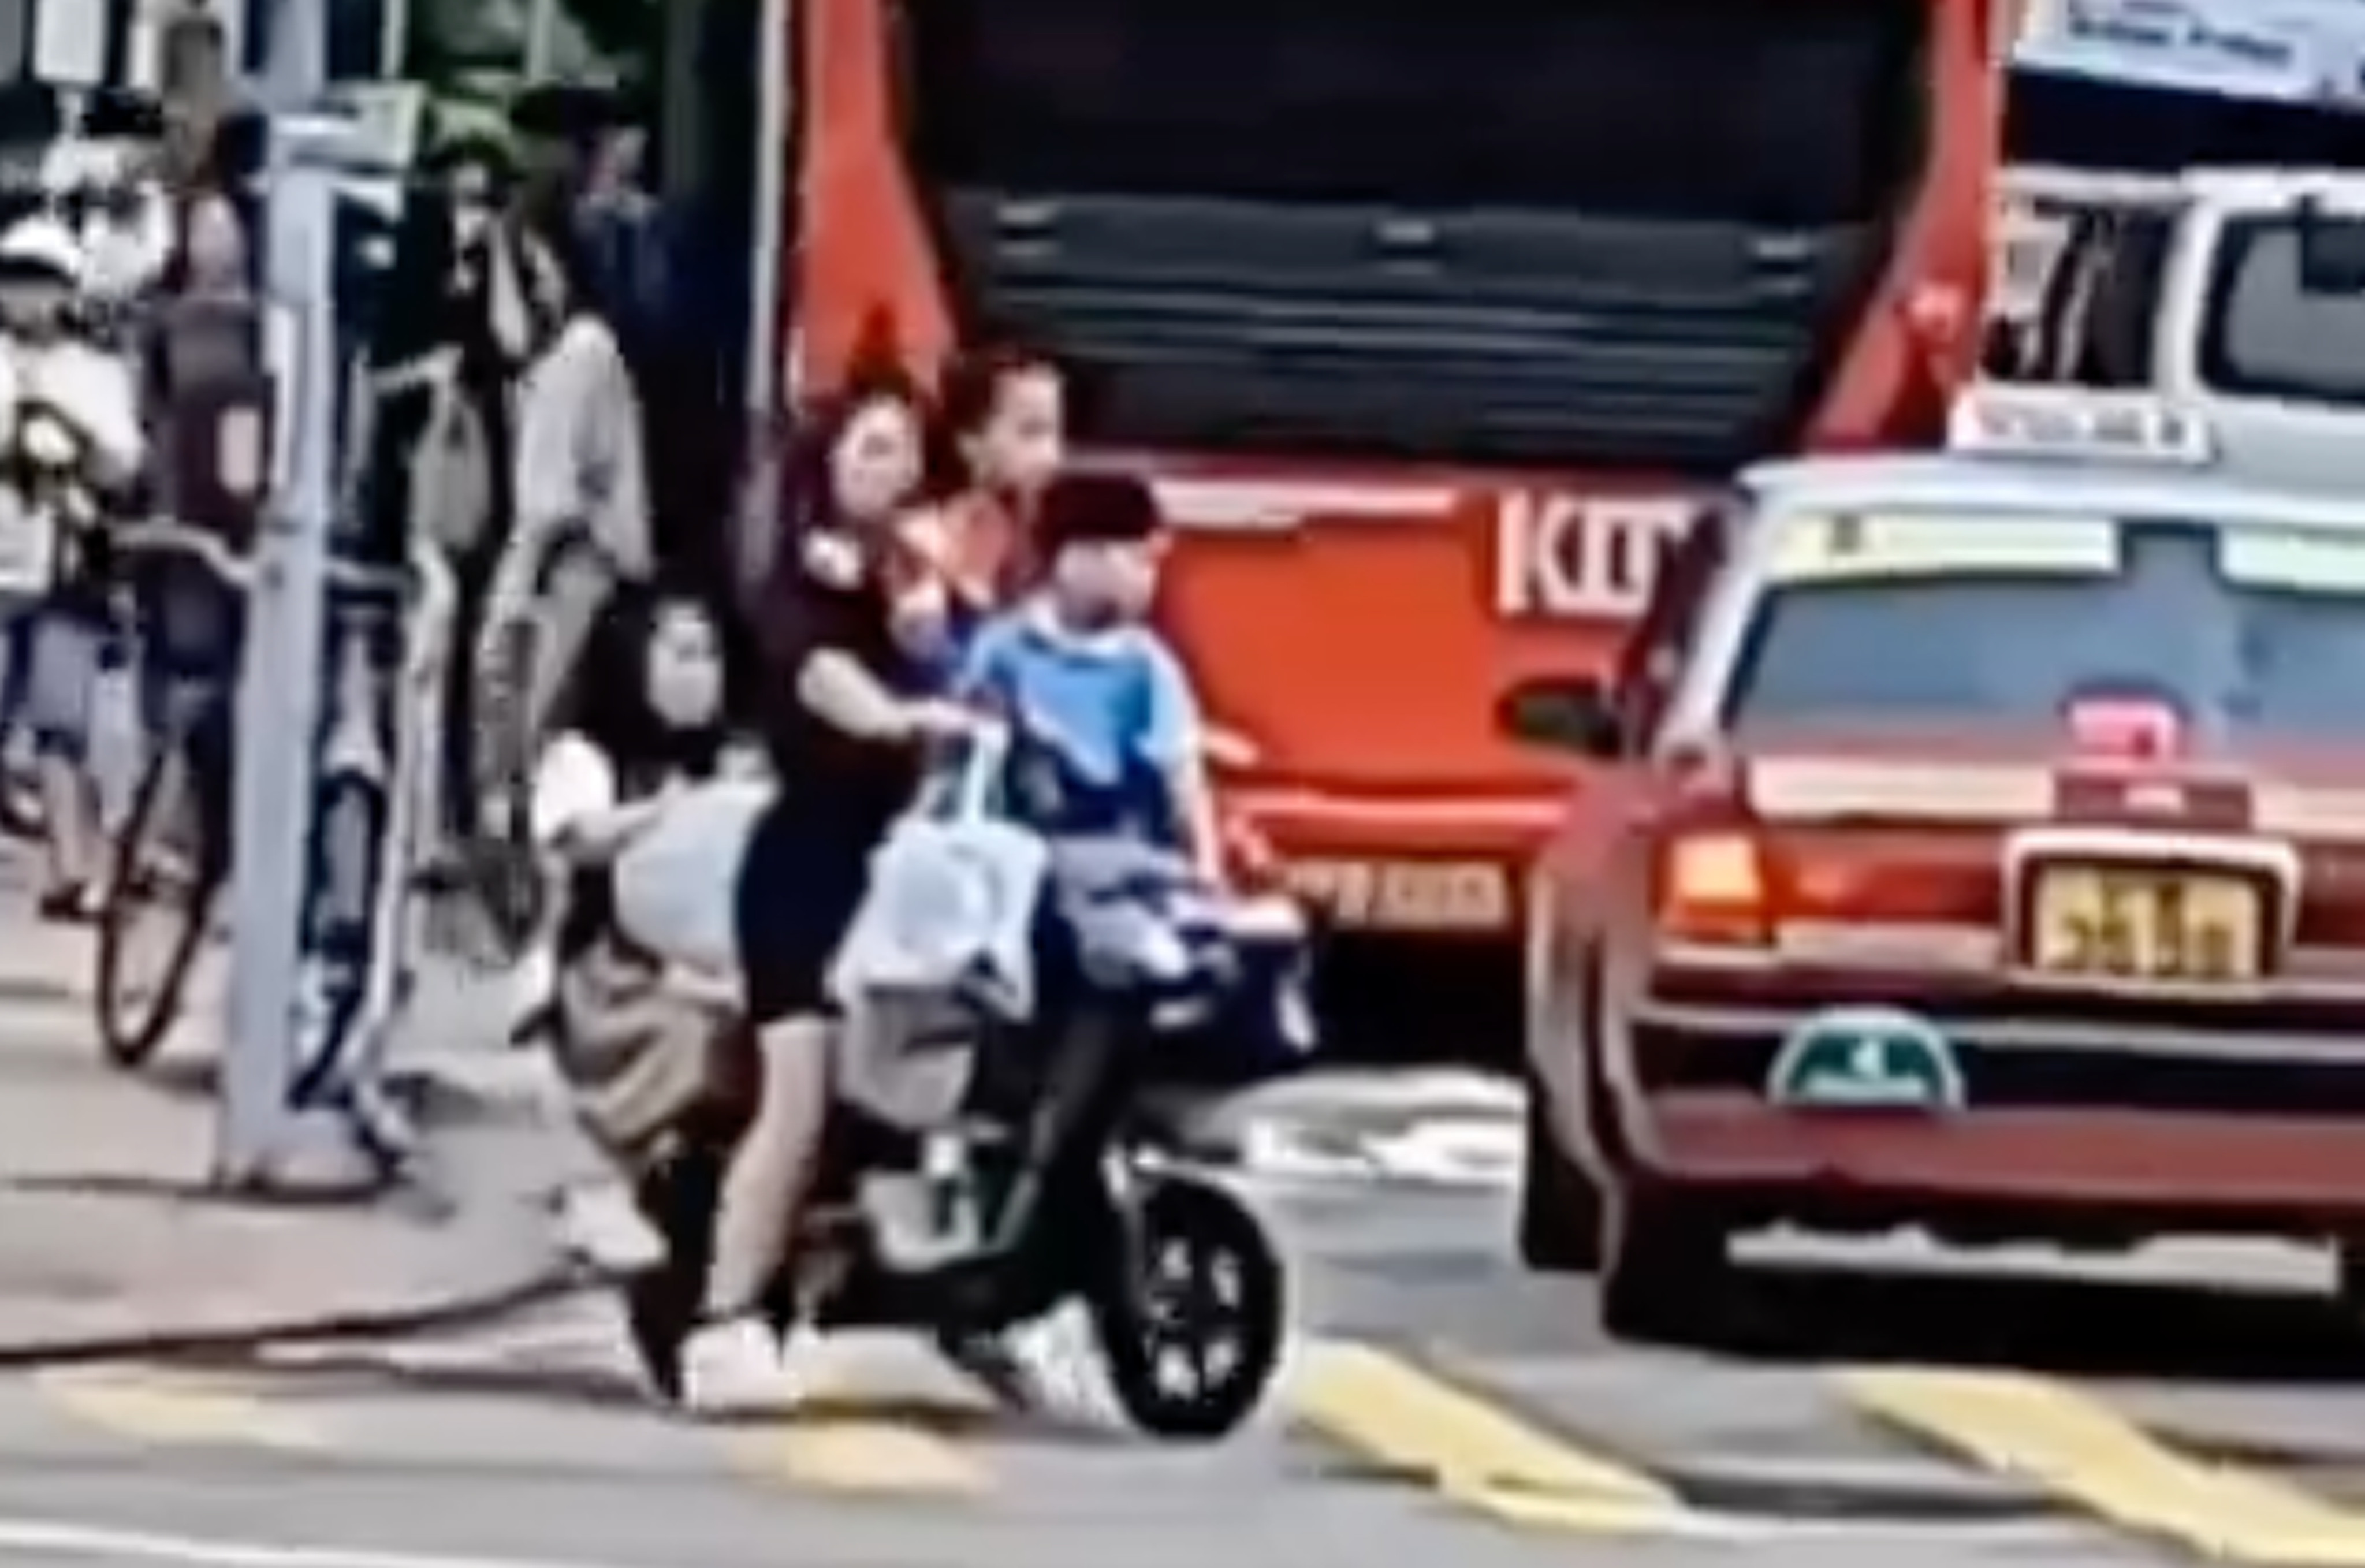 Footage online shows a woman riding a suspected e-bike while carrying three children, all without helmets. Photo: Facebook/香港交通突發報料區